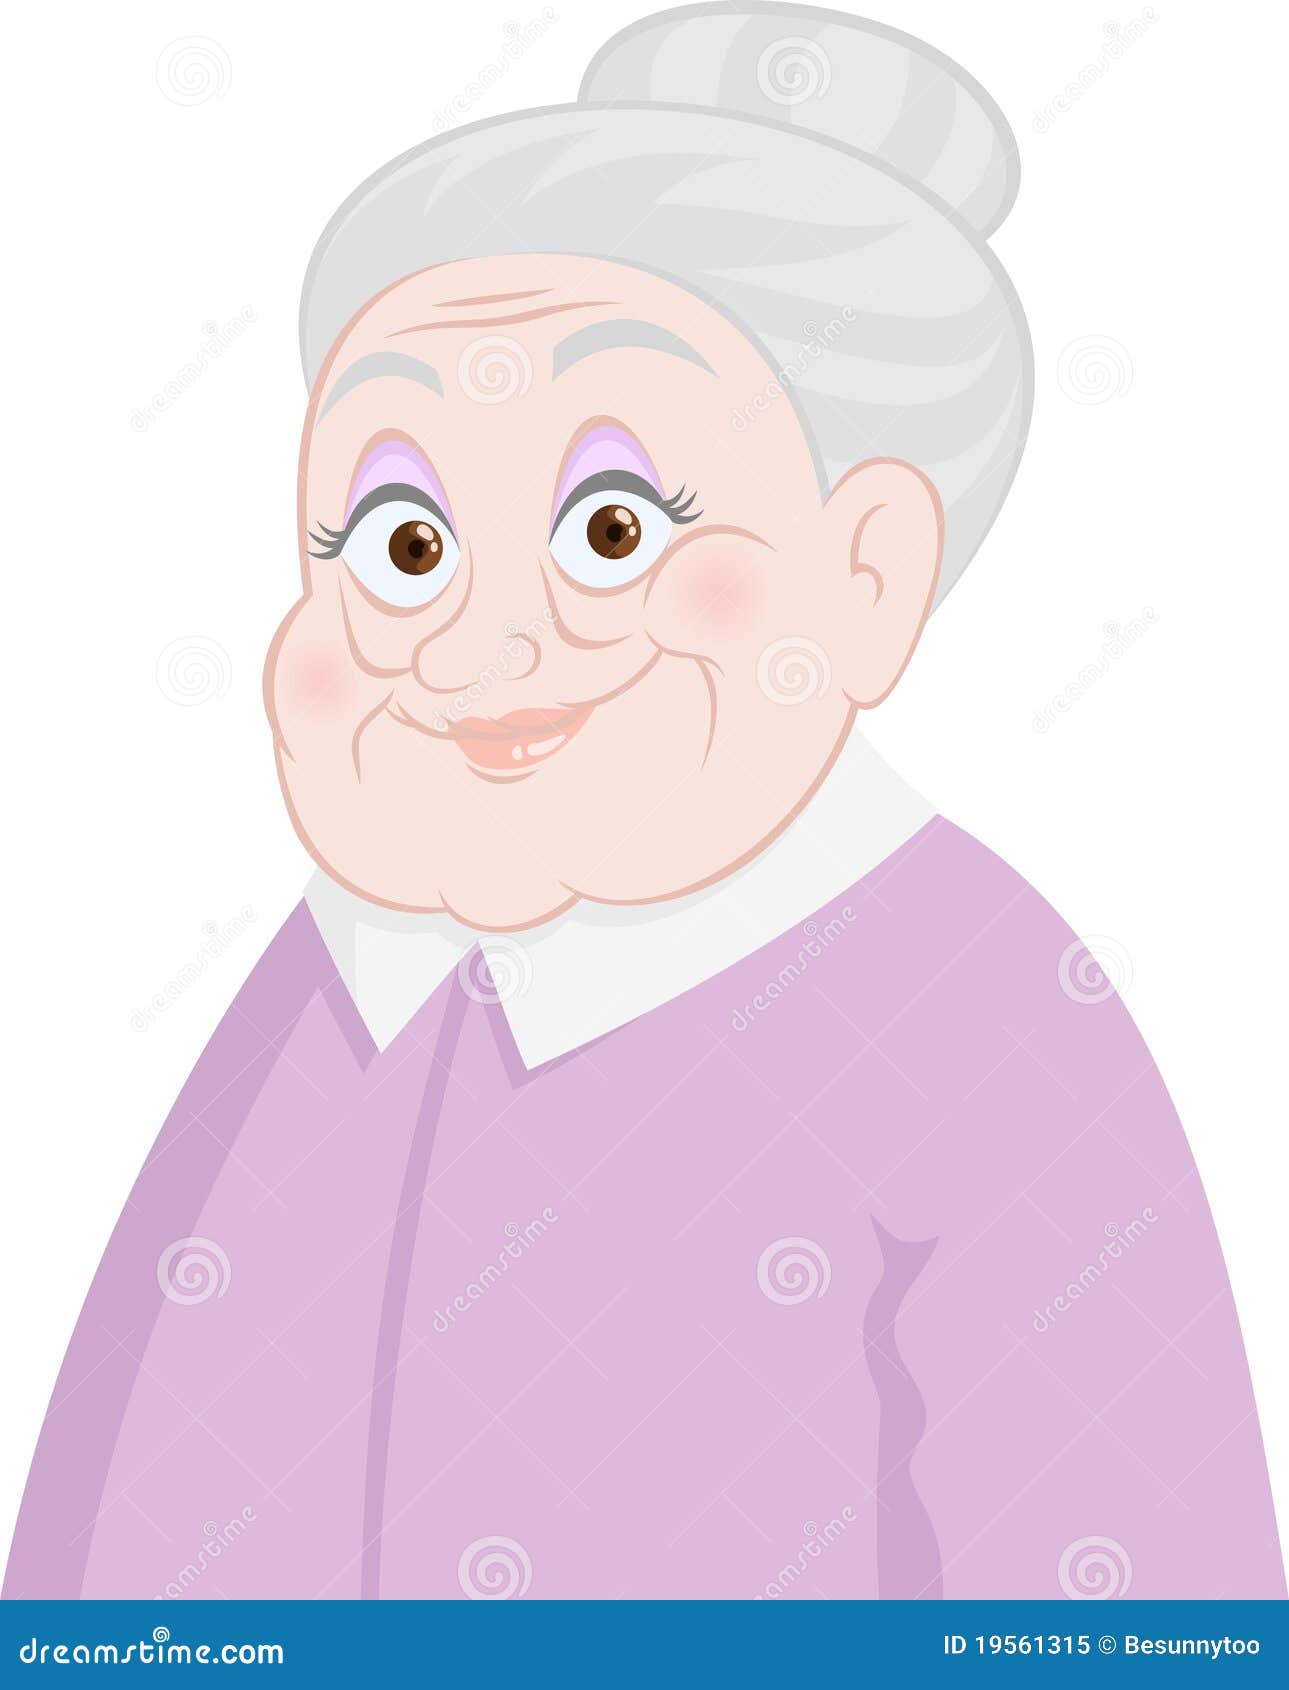 Old lady stock vector. Illustration of cartoon, looking - 19561315